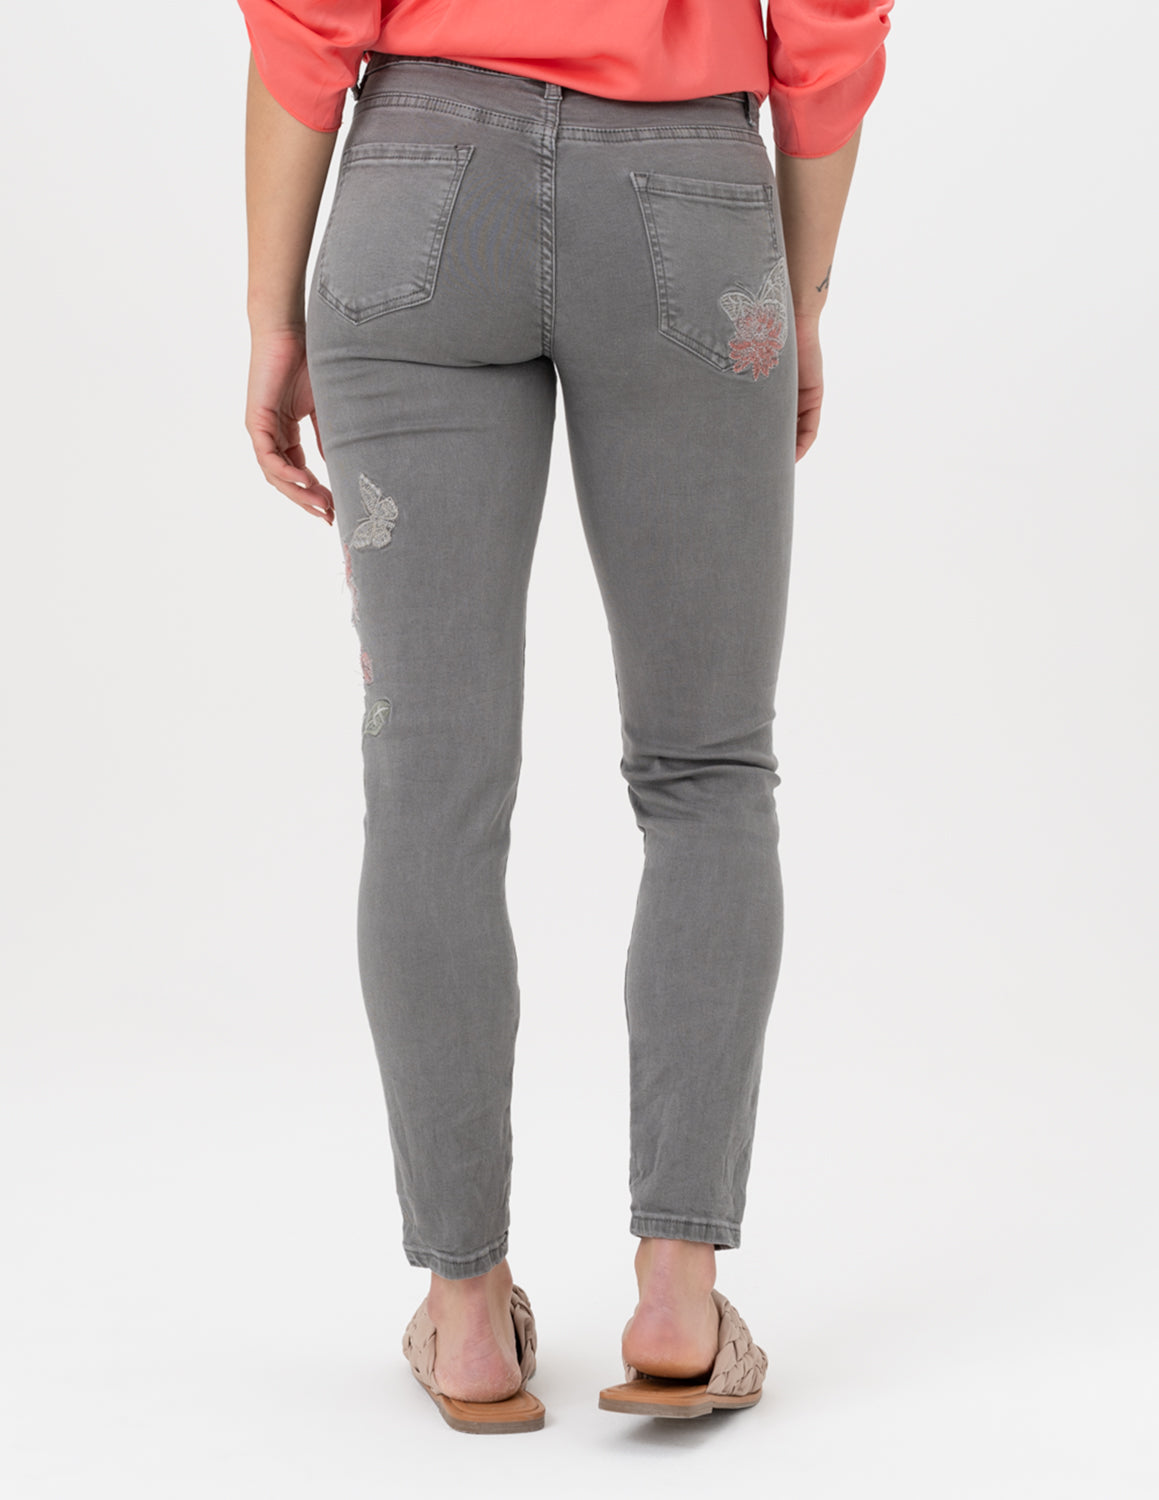 Embroidered Woven Pants // Charcoal